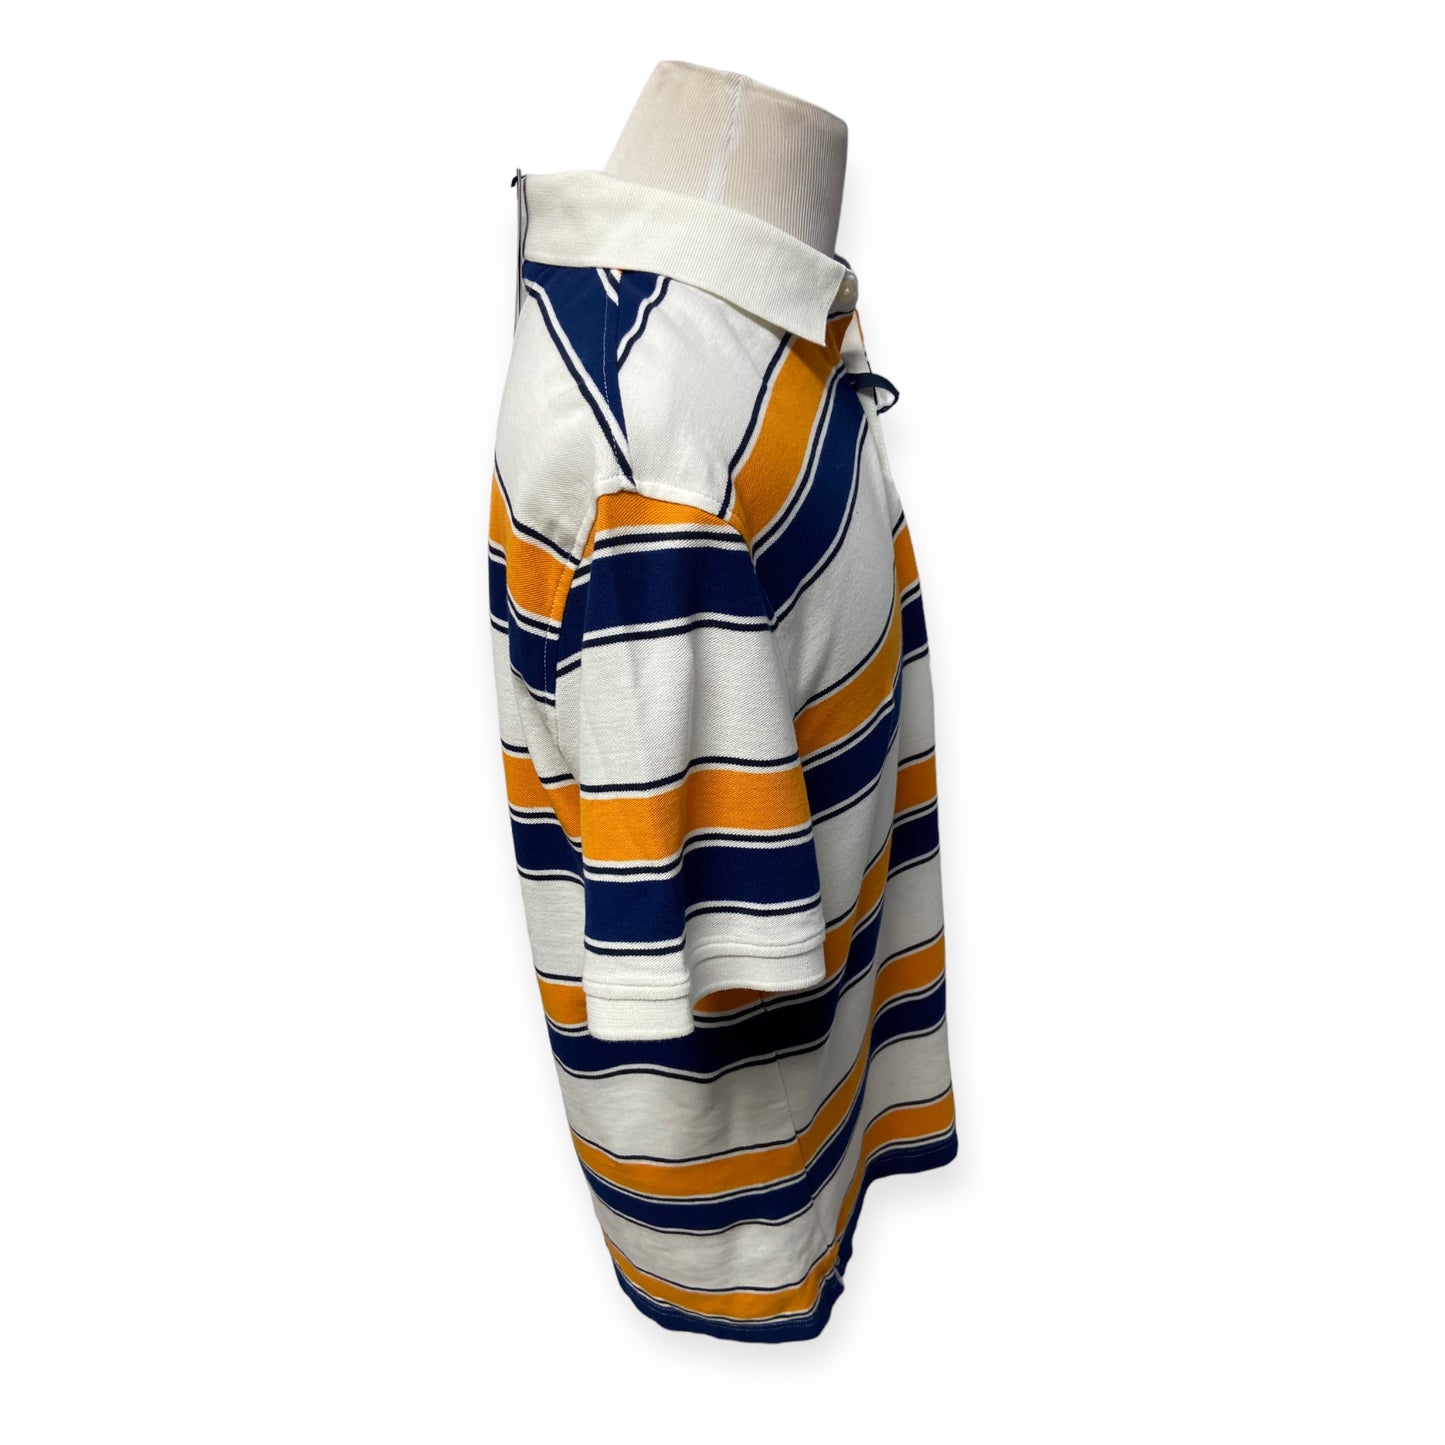 NWT Tommy Hilfiger Orange and Blue Striped Collared Shirt (Size XL)